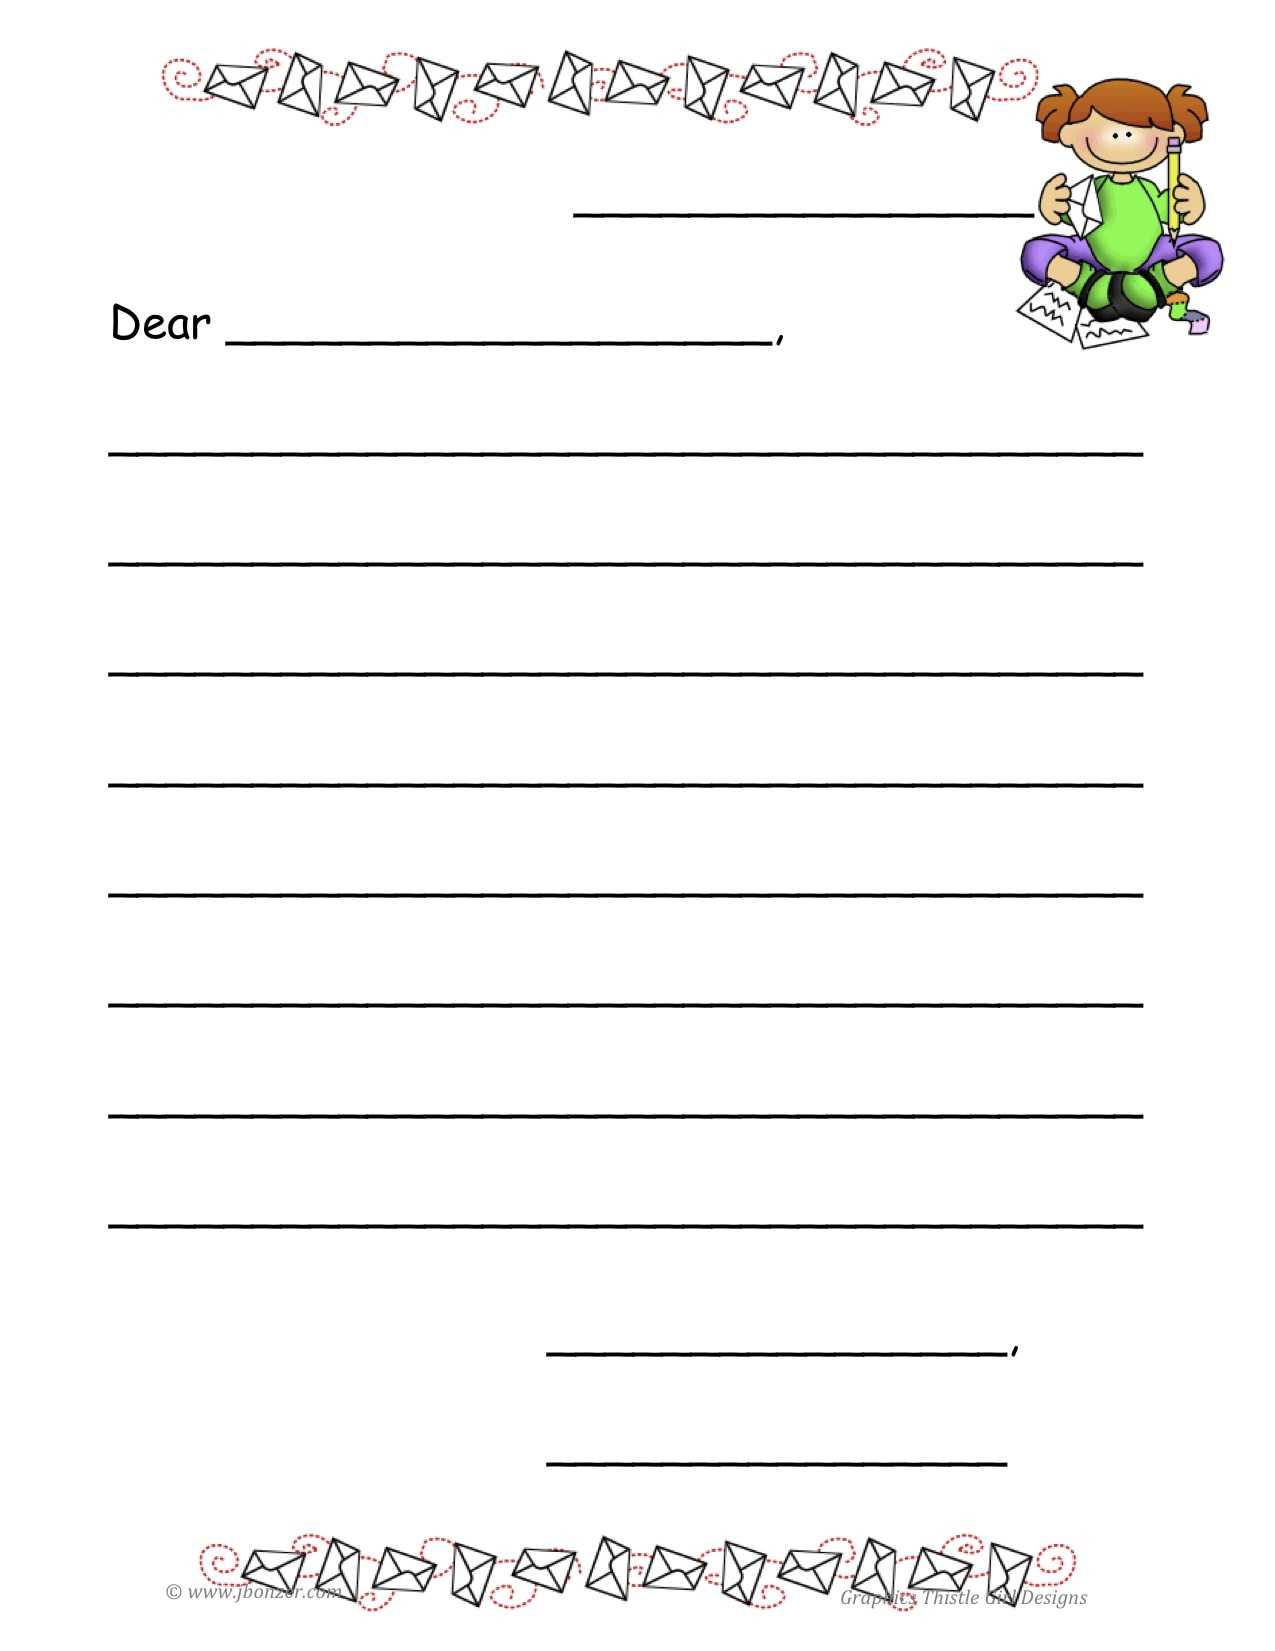 Blank Letter Writing Paper | Floss Papers For Blank Letter Writing Template For Kids